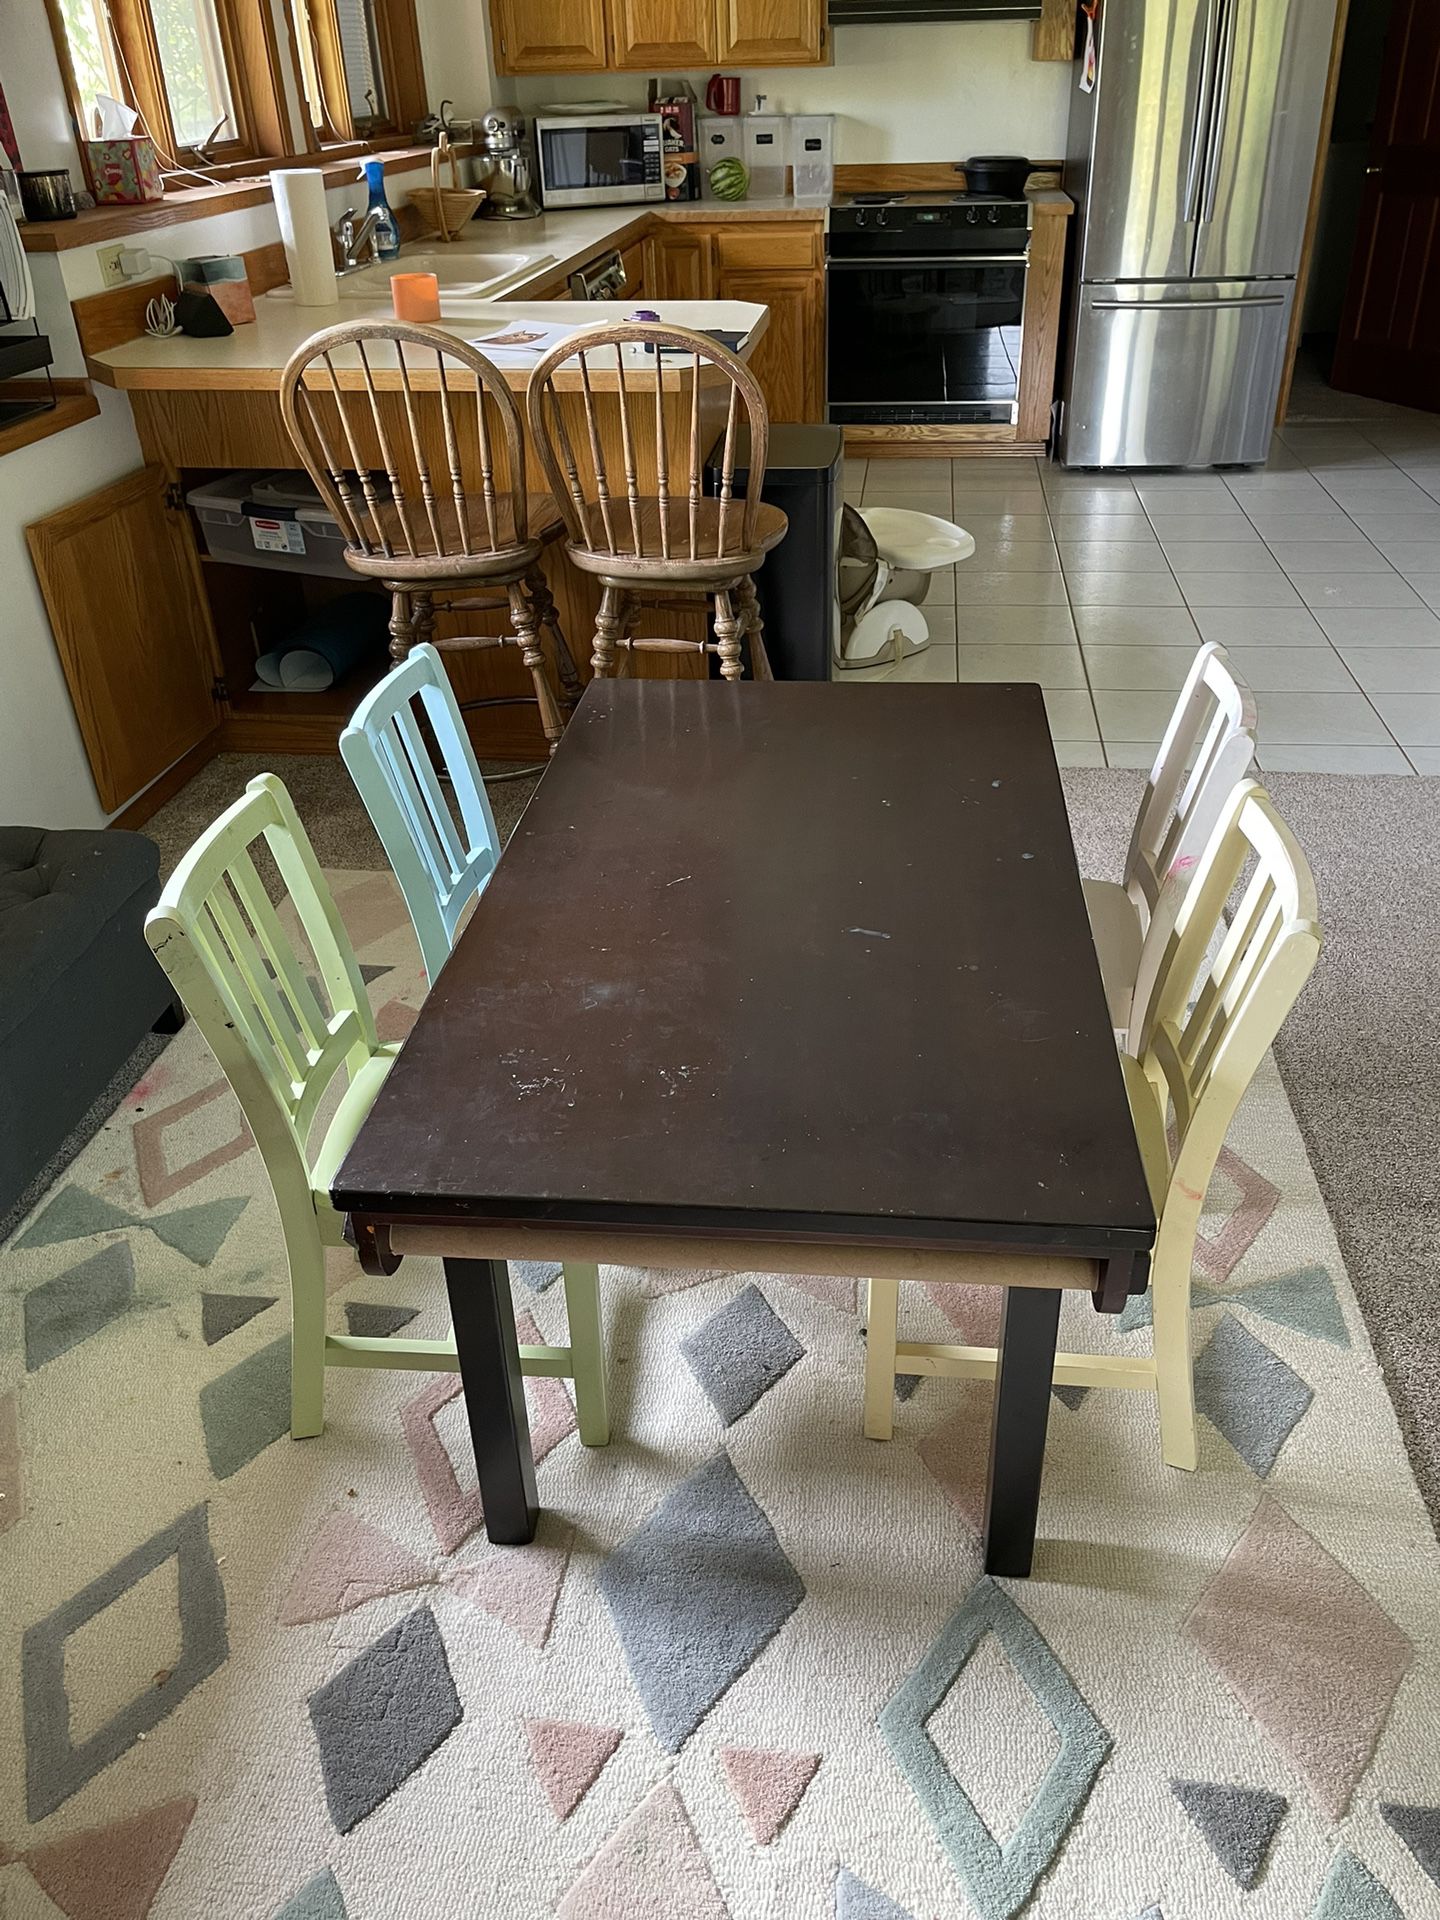 Crate & Barrel Children’s Table And 4 Chairs